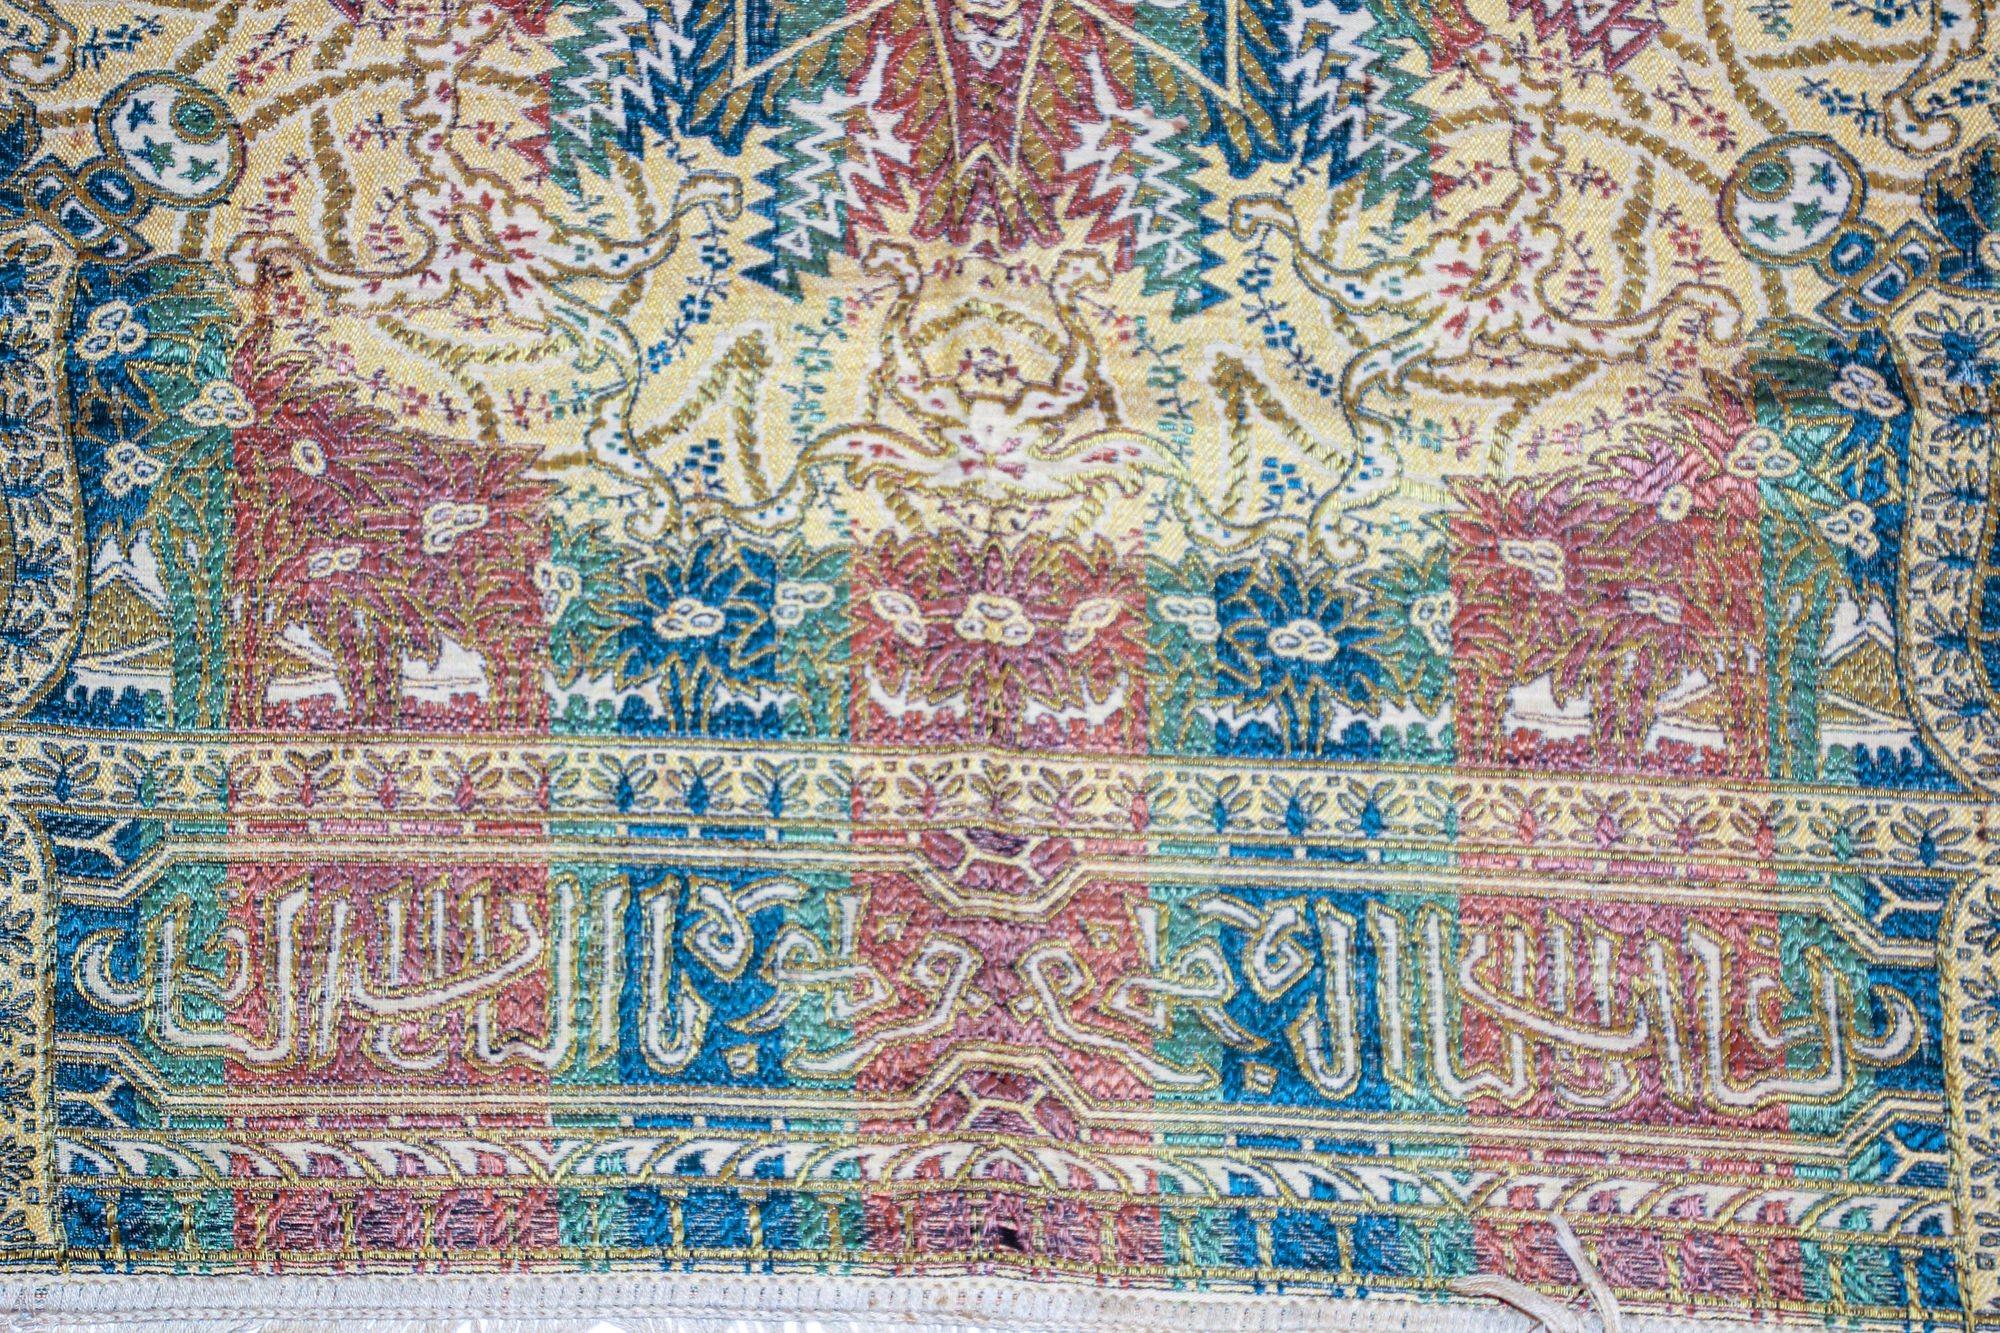 1940s Granada Islamic Spain Textile with Arabic Calligraphy Writing In Good Condition For Sale In North Hollywood, CA